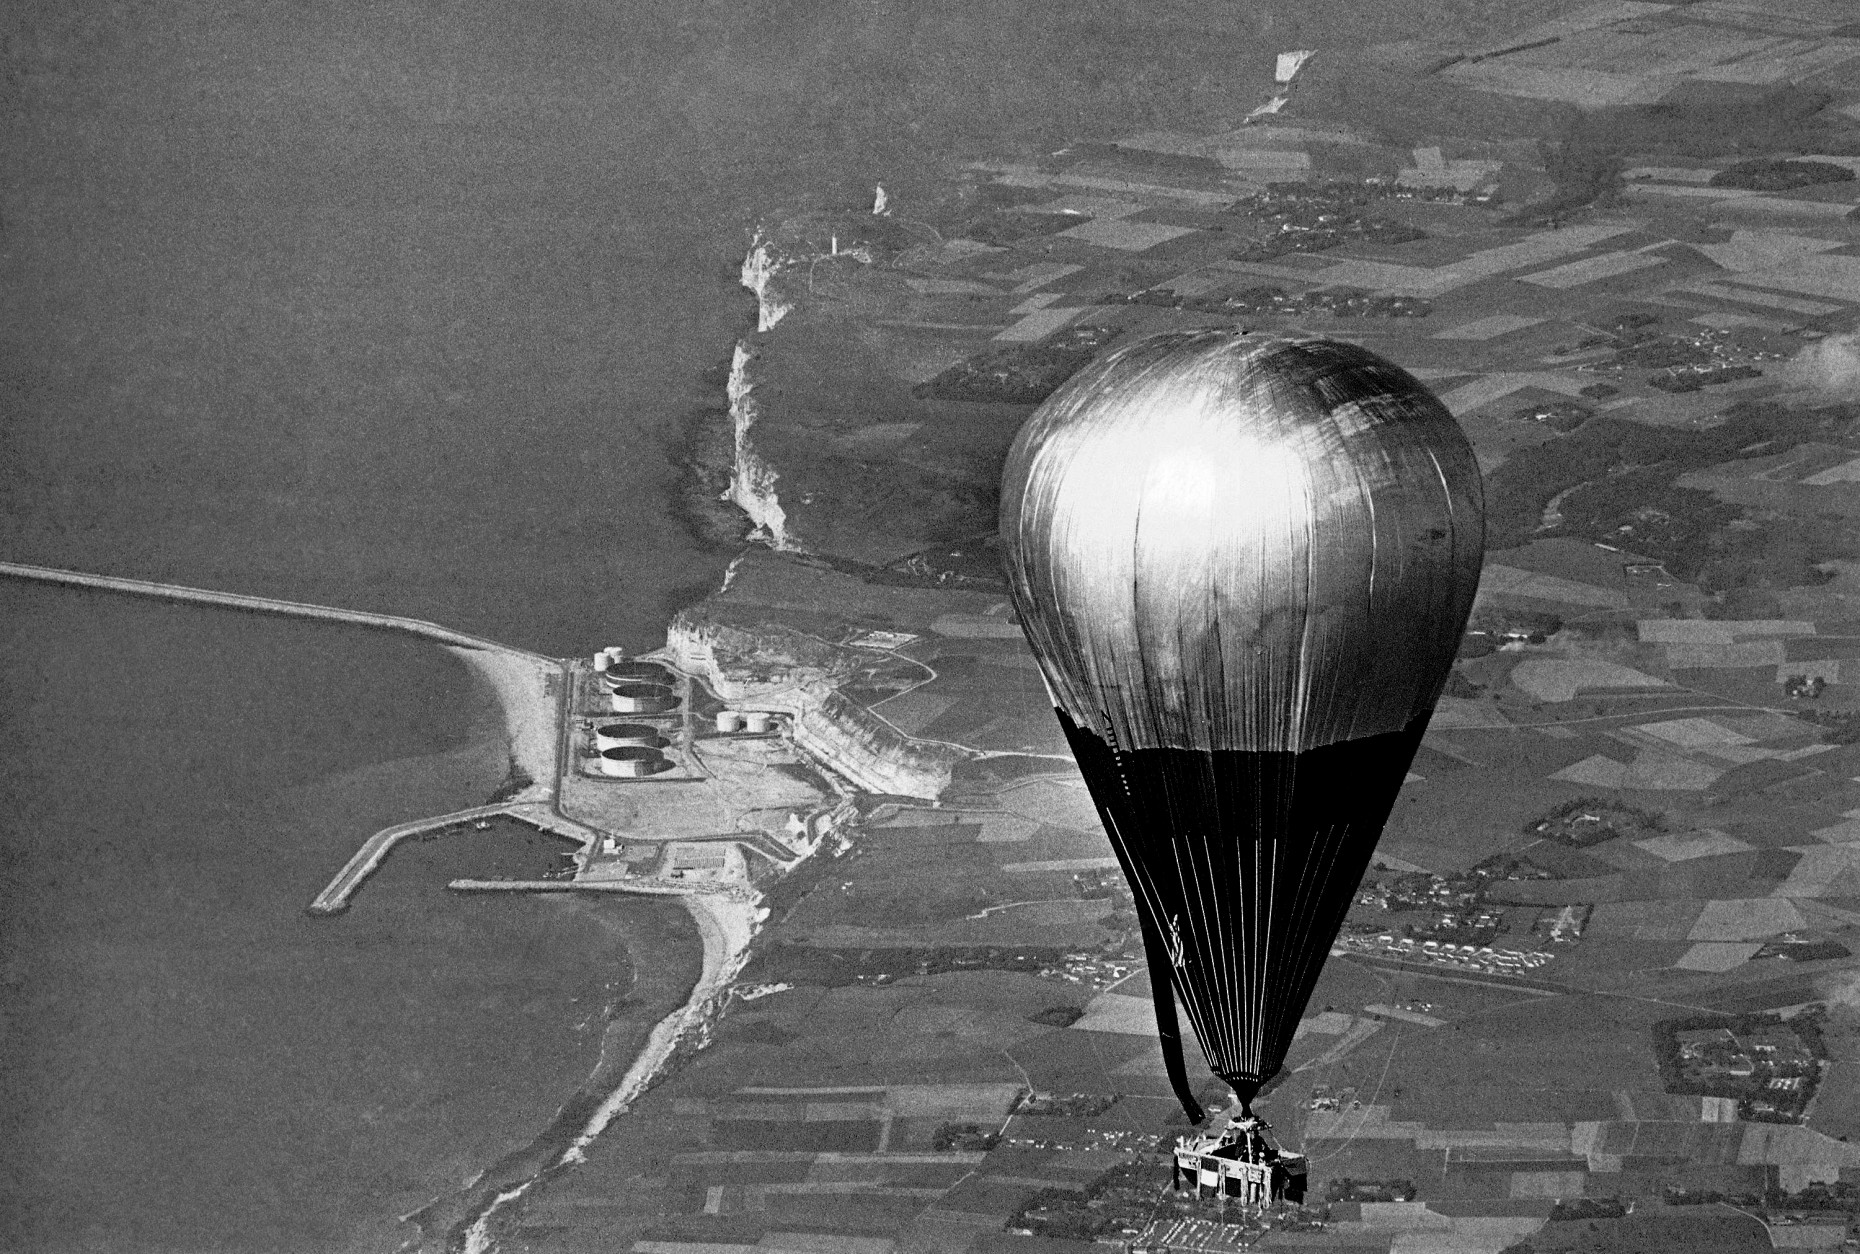 The balloon Double Eagle II crosses the French Coast near Le Havre, Aug. 17, 1978 near the end of its trans-Atlantic flight. Maxie Anderson, Ben Abruzzo and Larry Newman, all from Albuquerque, N.M. left from Presque Isle, Maine to complete the first successful crossing of the Atlantic Ocean by balloon. (AP Photo)